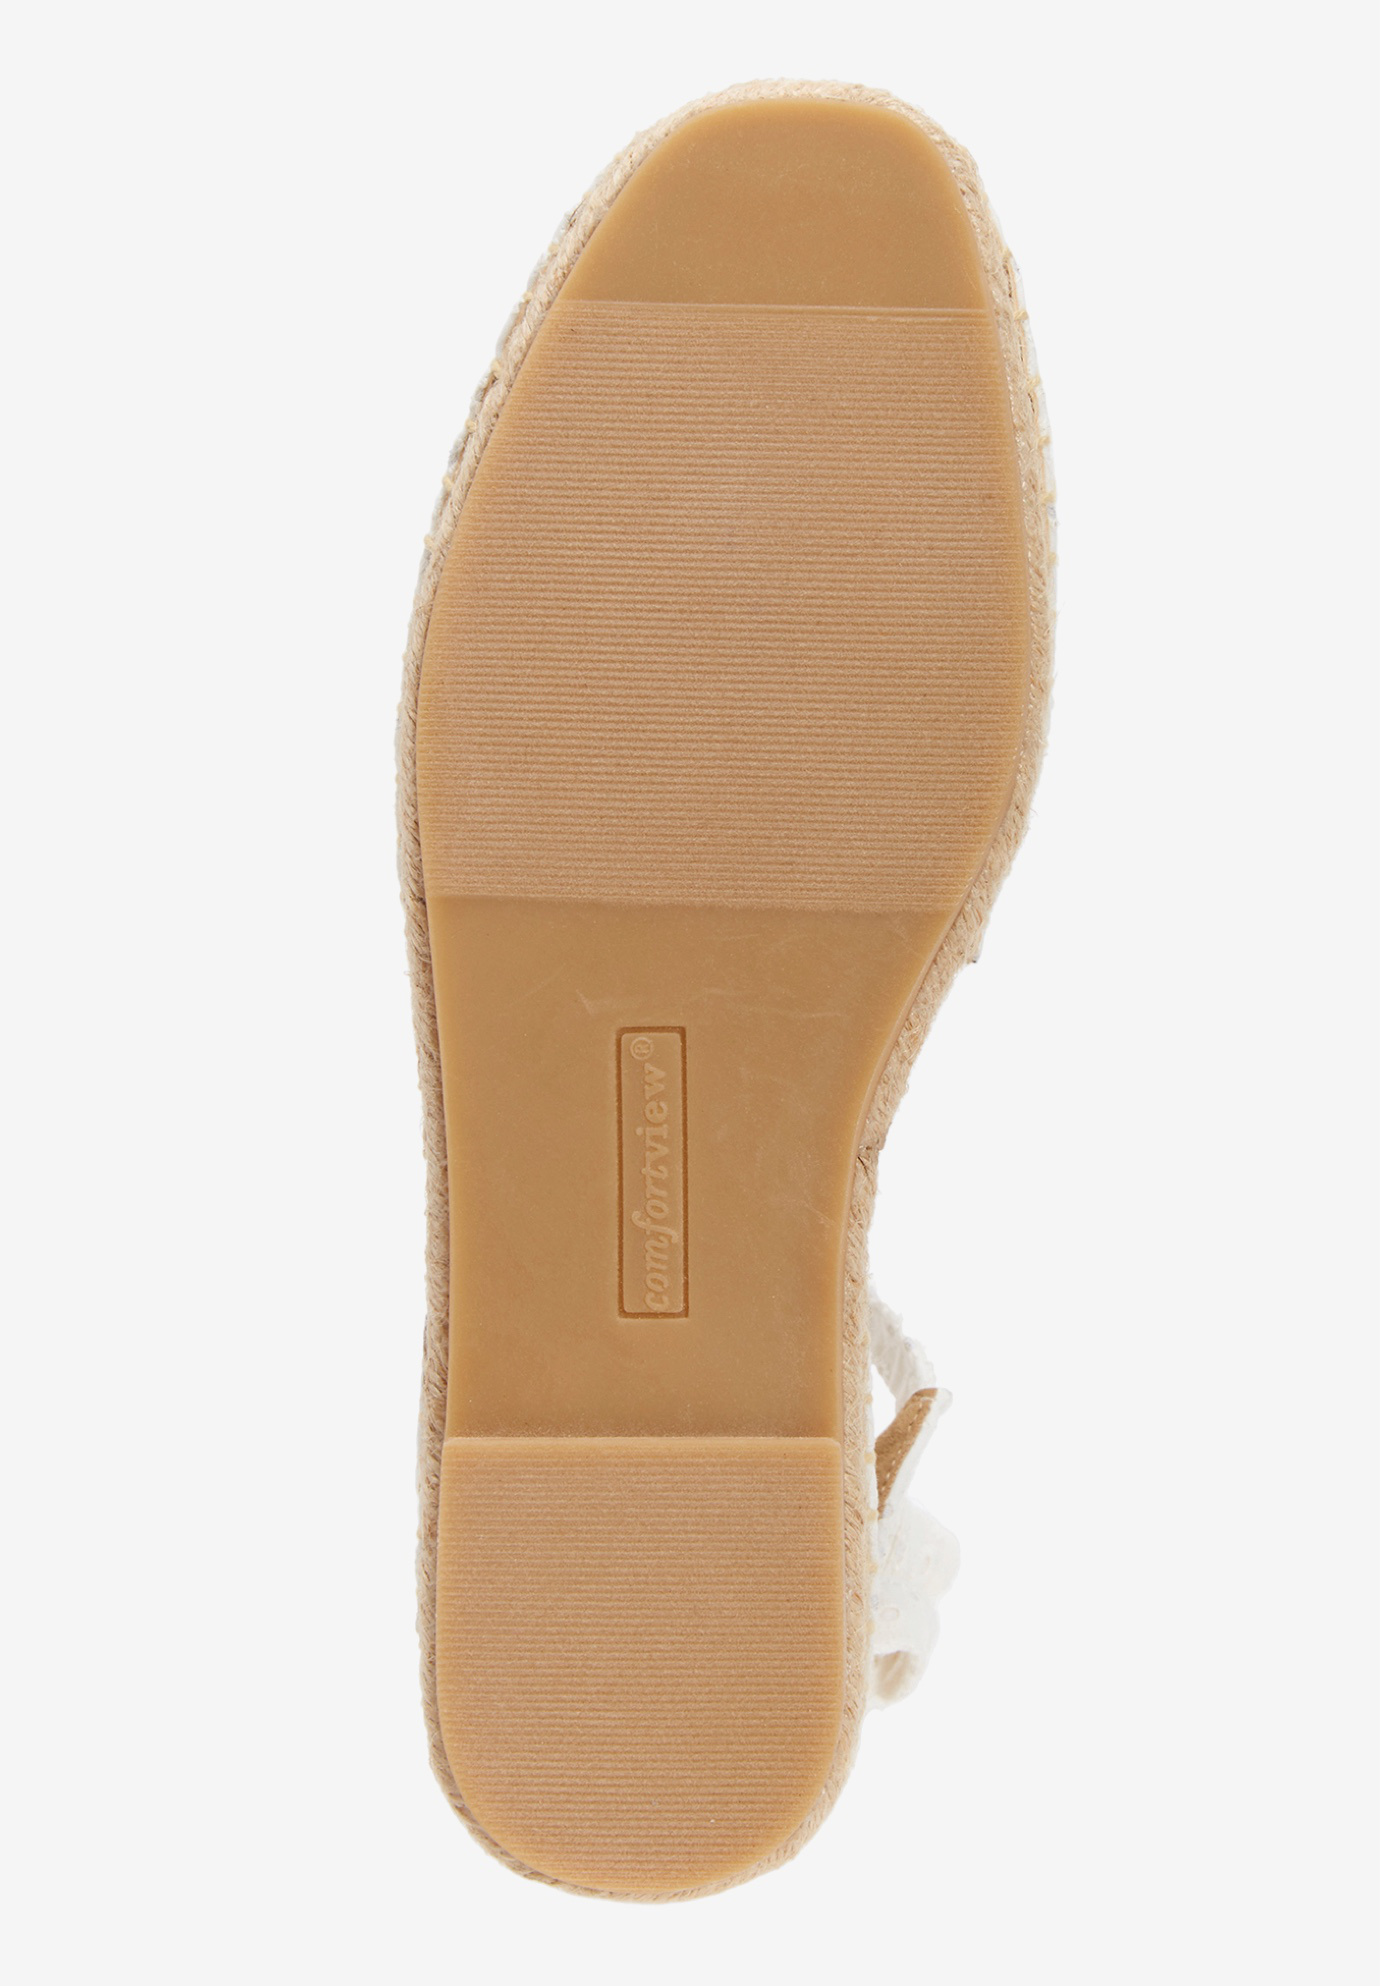 Comfortview Women's Wide Width The Shayla Flat Espadrille Shoes - image 4 of 7